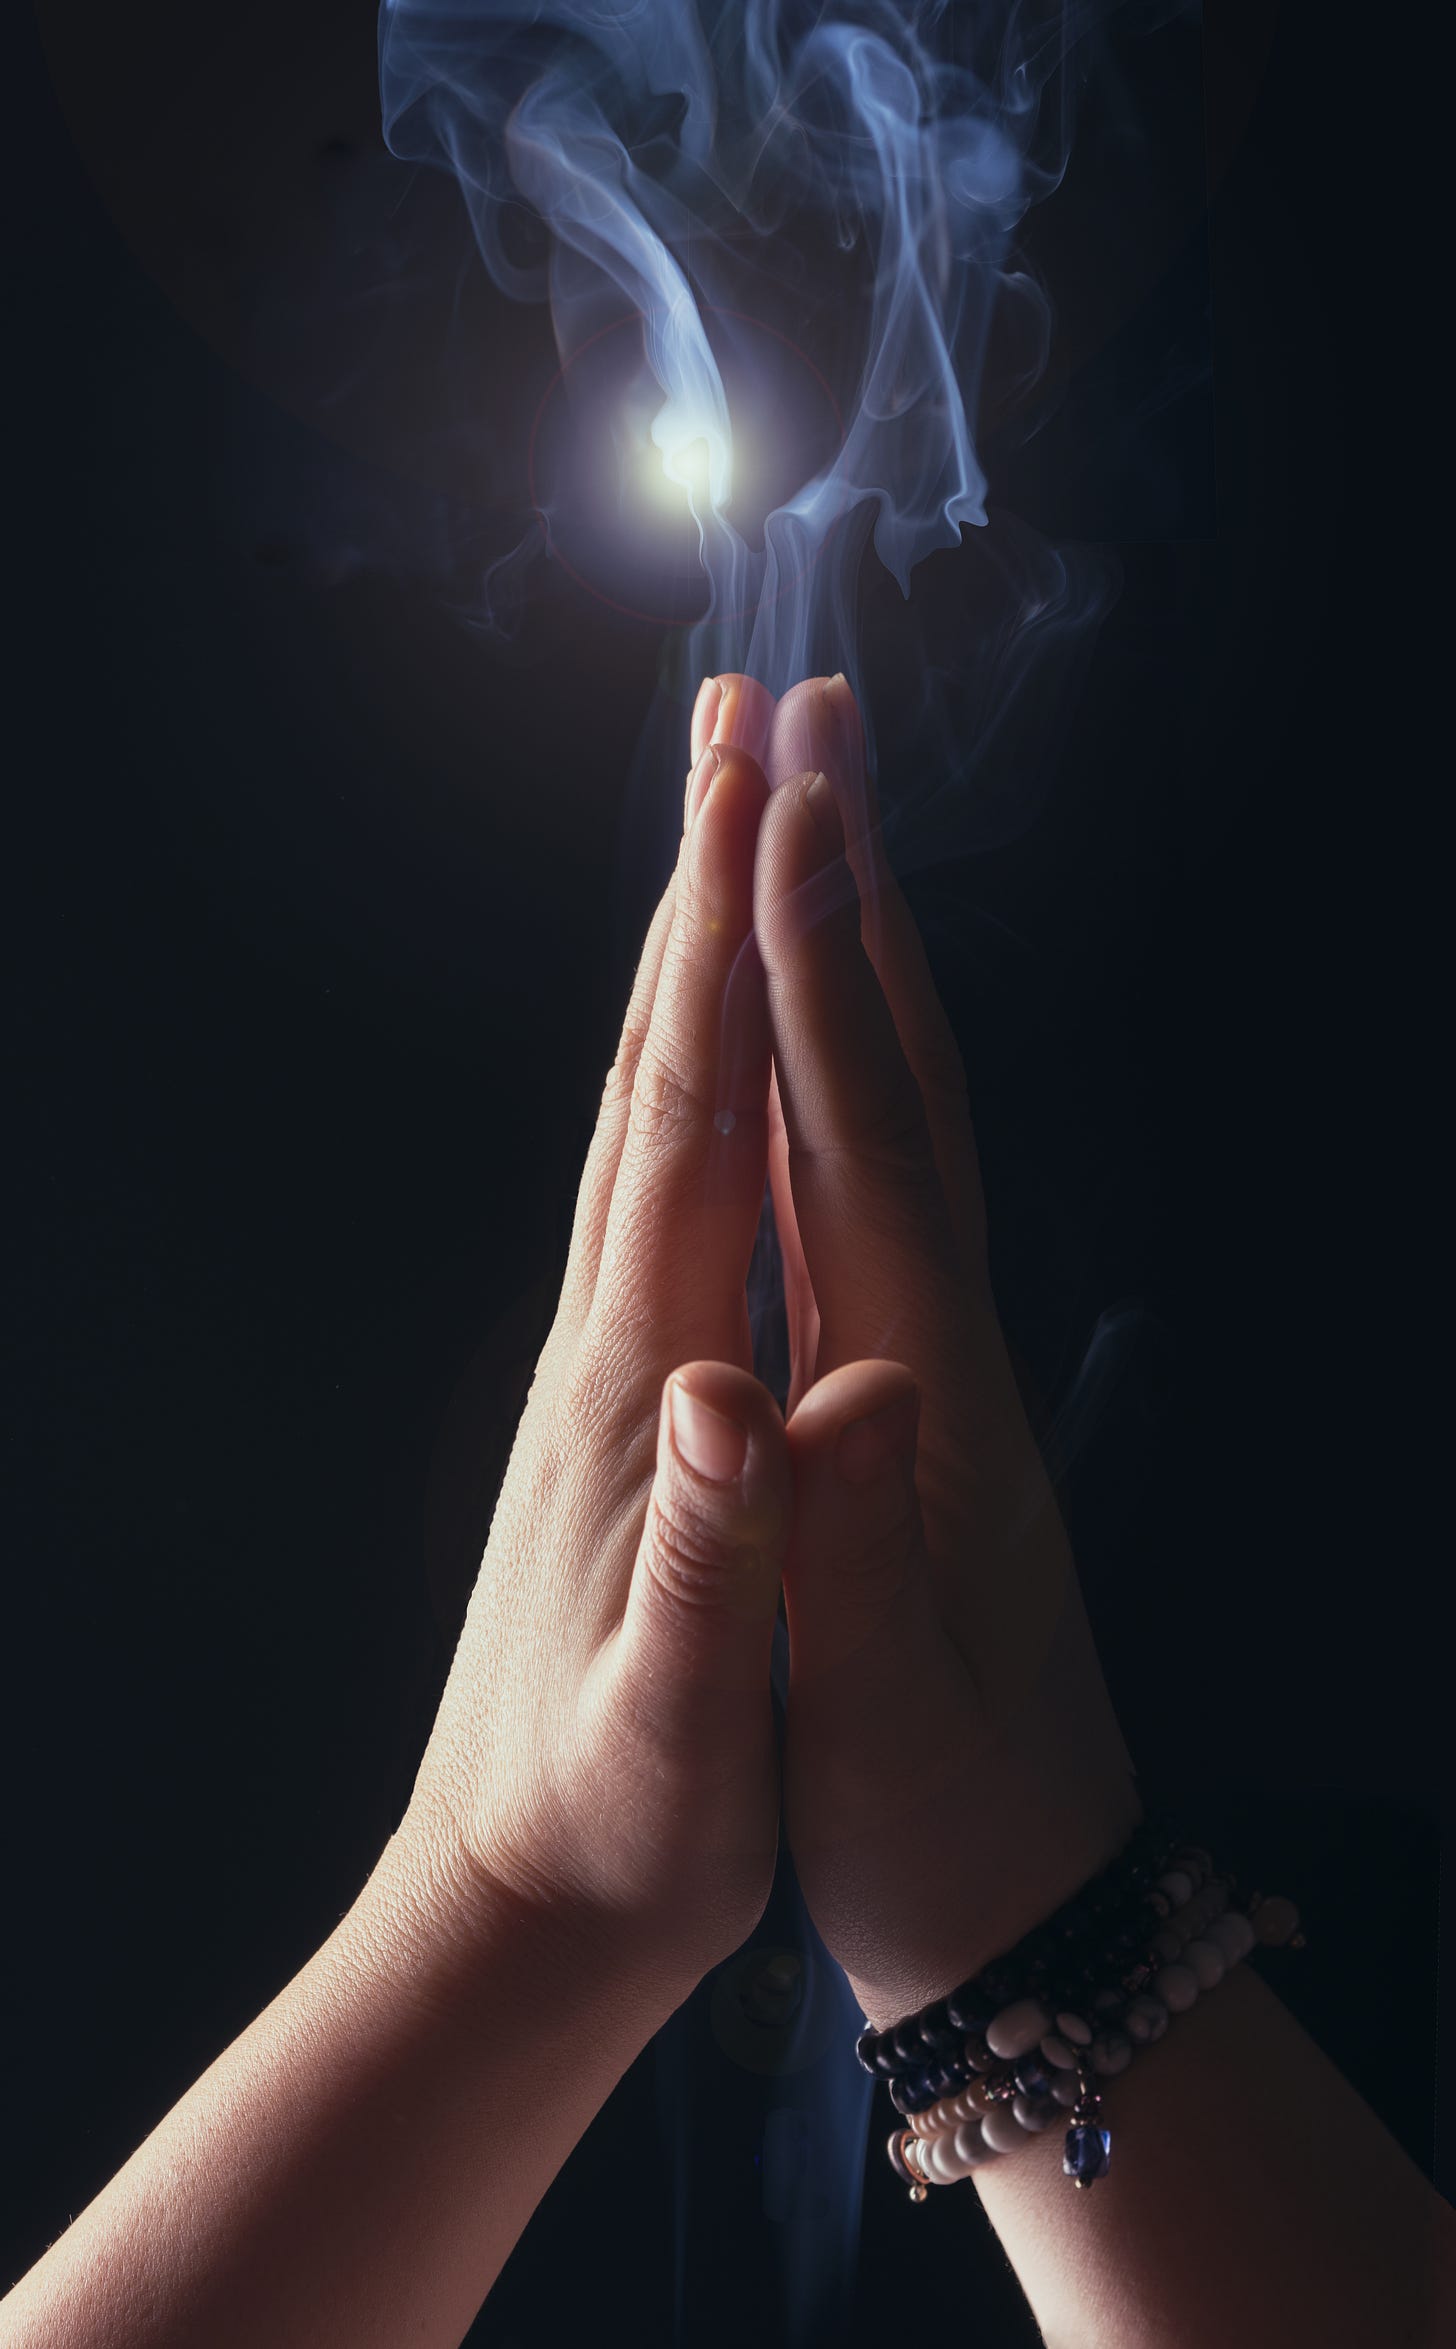 Two hands, raised, palm to palm, creating the illusion of smoke (actually, that seems to be Photoshopped in) with an eerie light source behind it